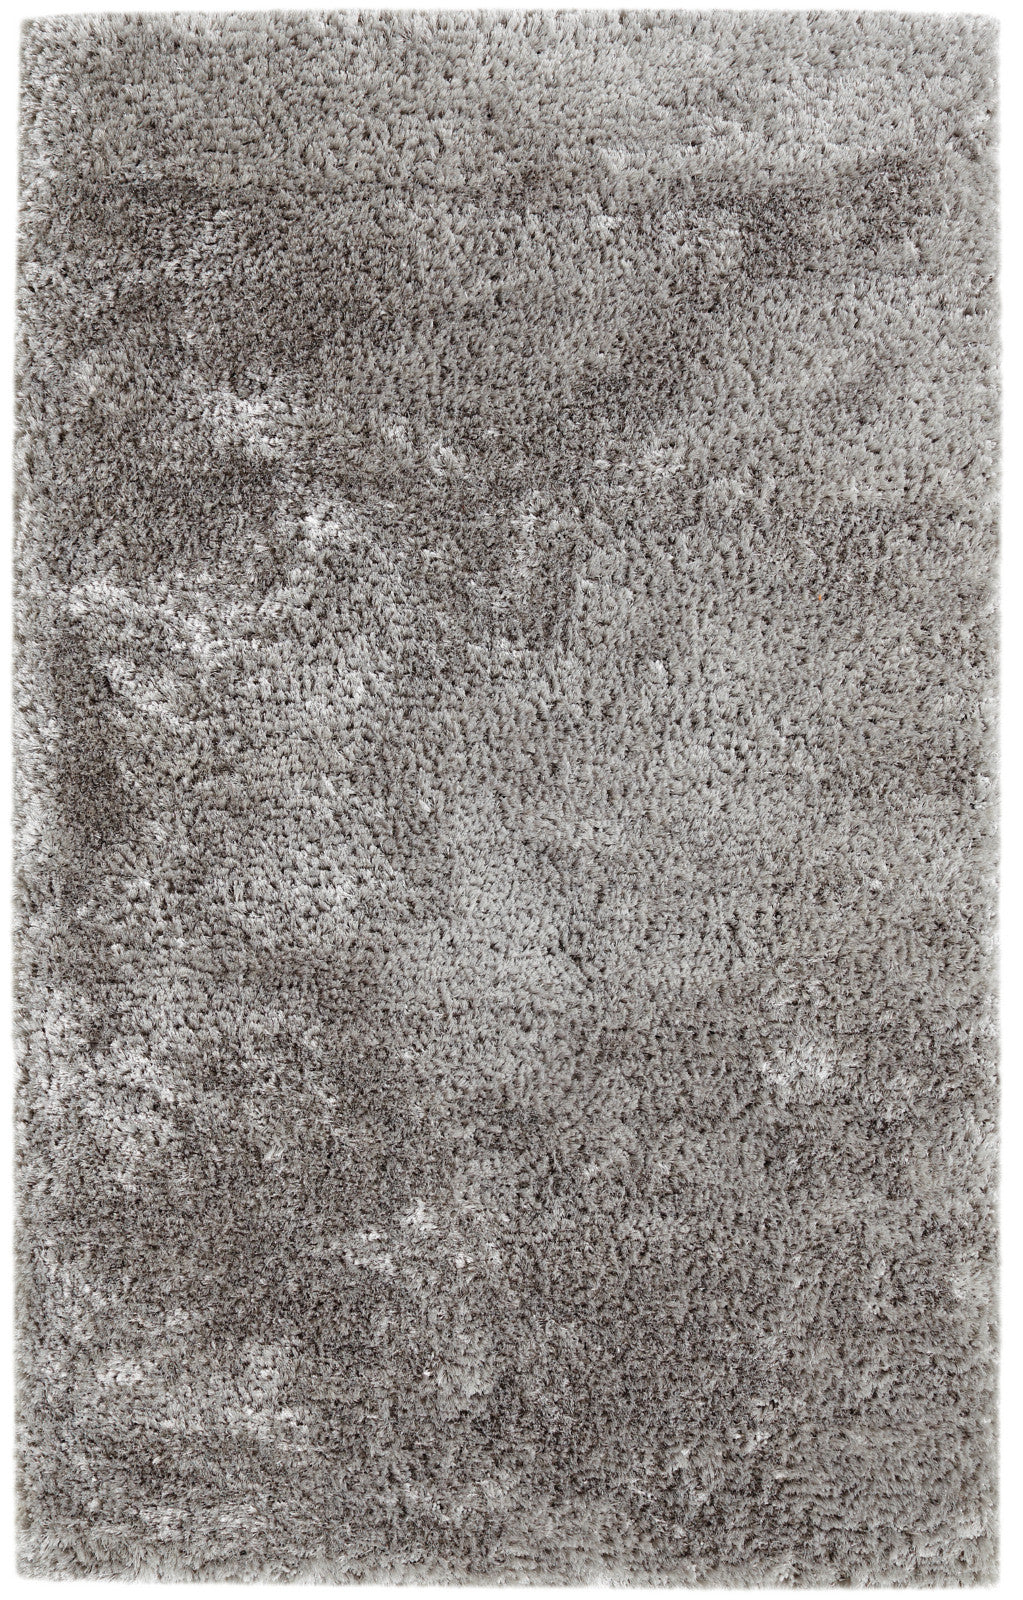 Dynamic Rugs Timeless 6000 Light Silver Area Rug main image